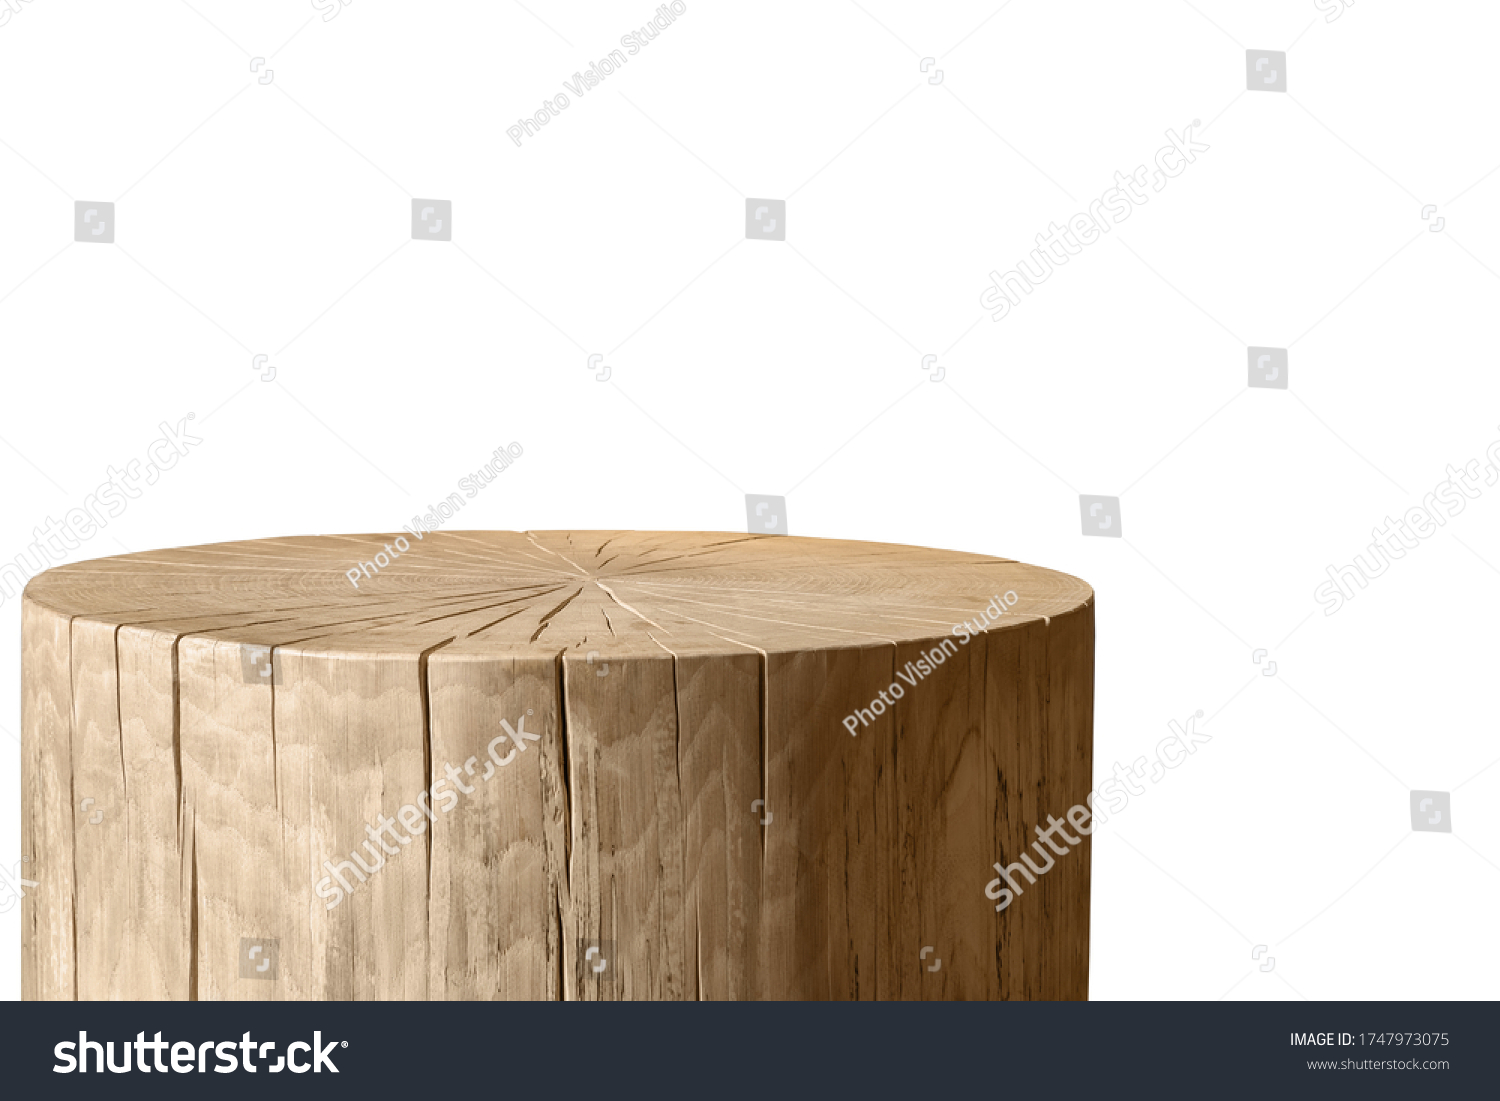 Decorative round wooden table on white background. #1747973075